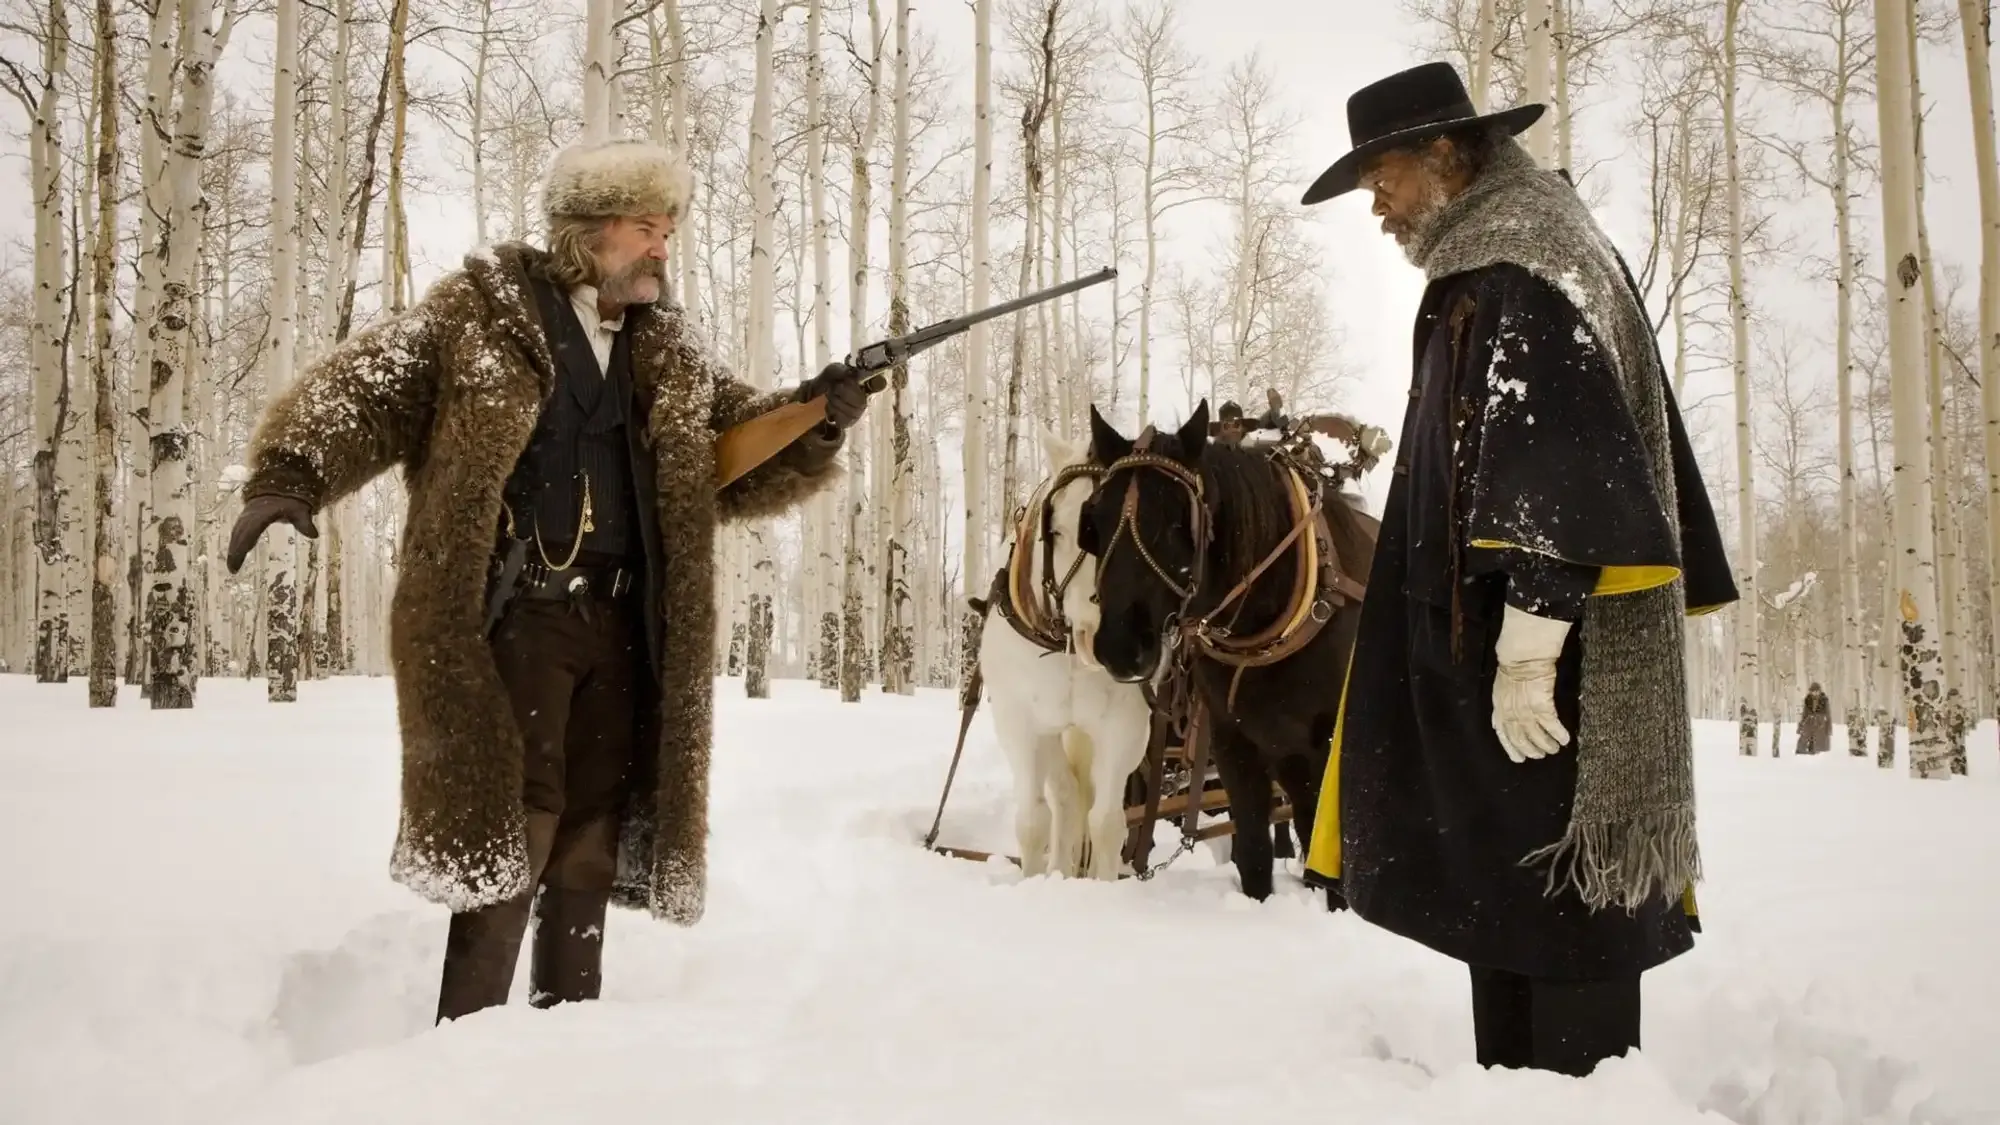 The Hateful Eight movie review